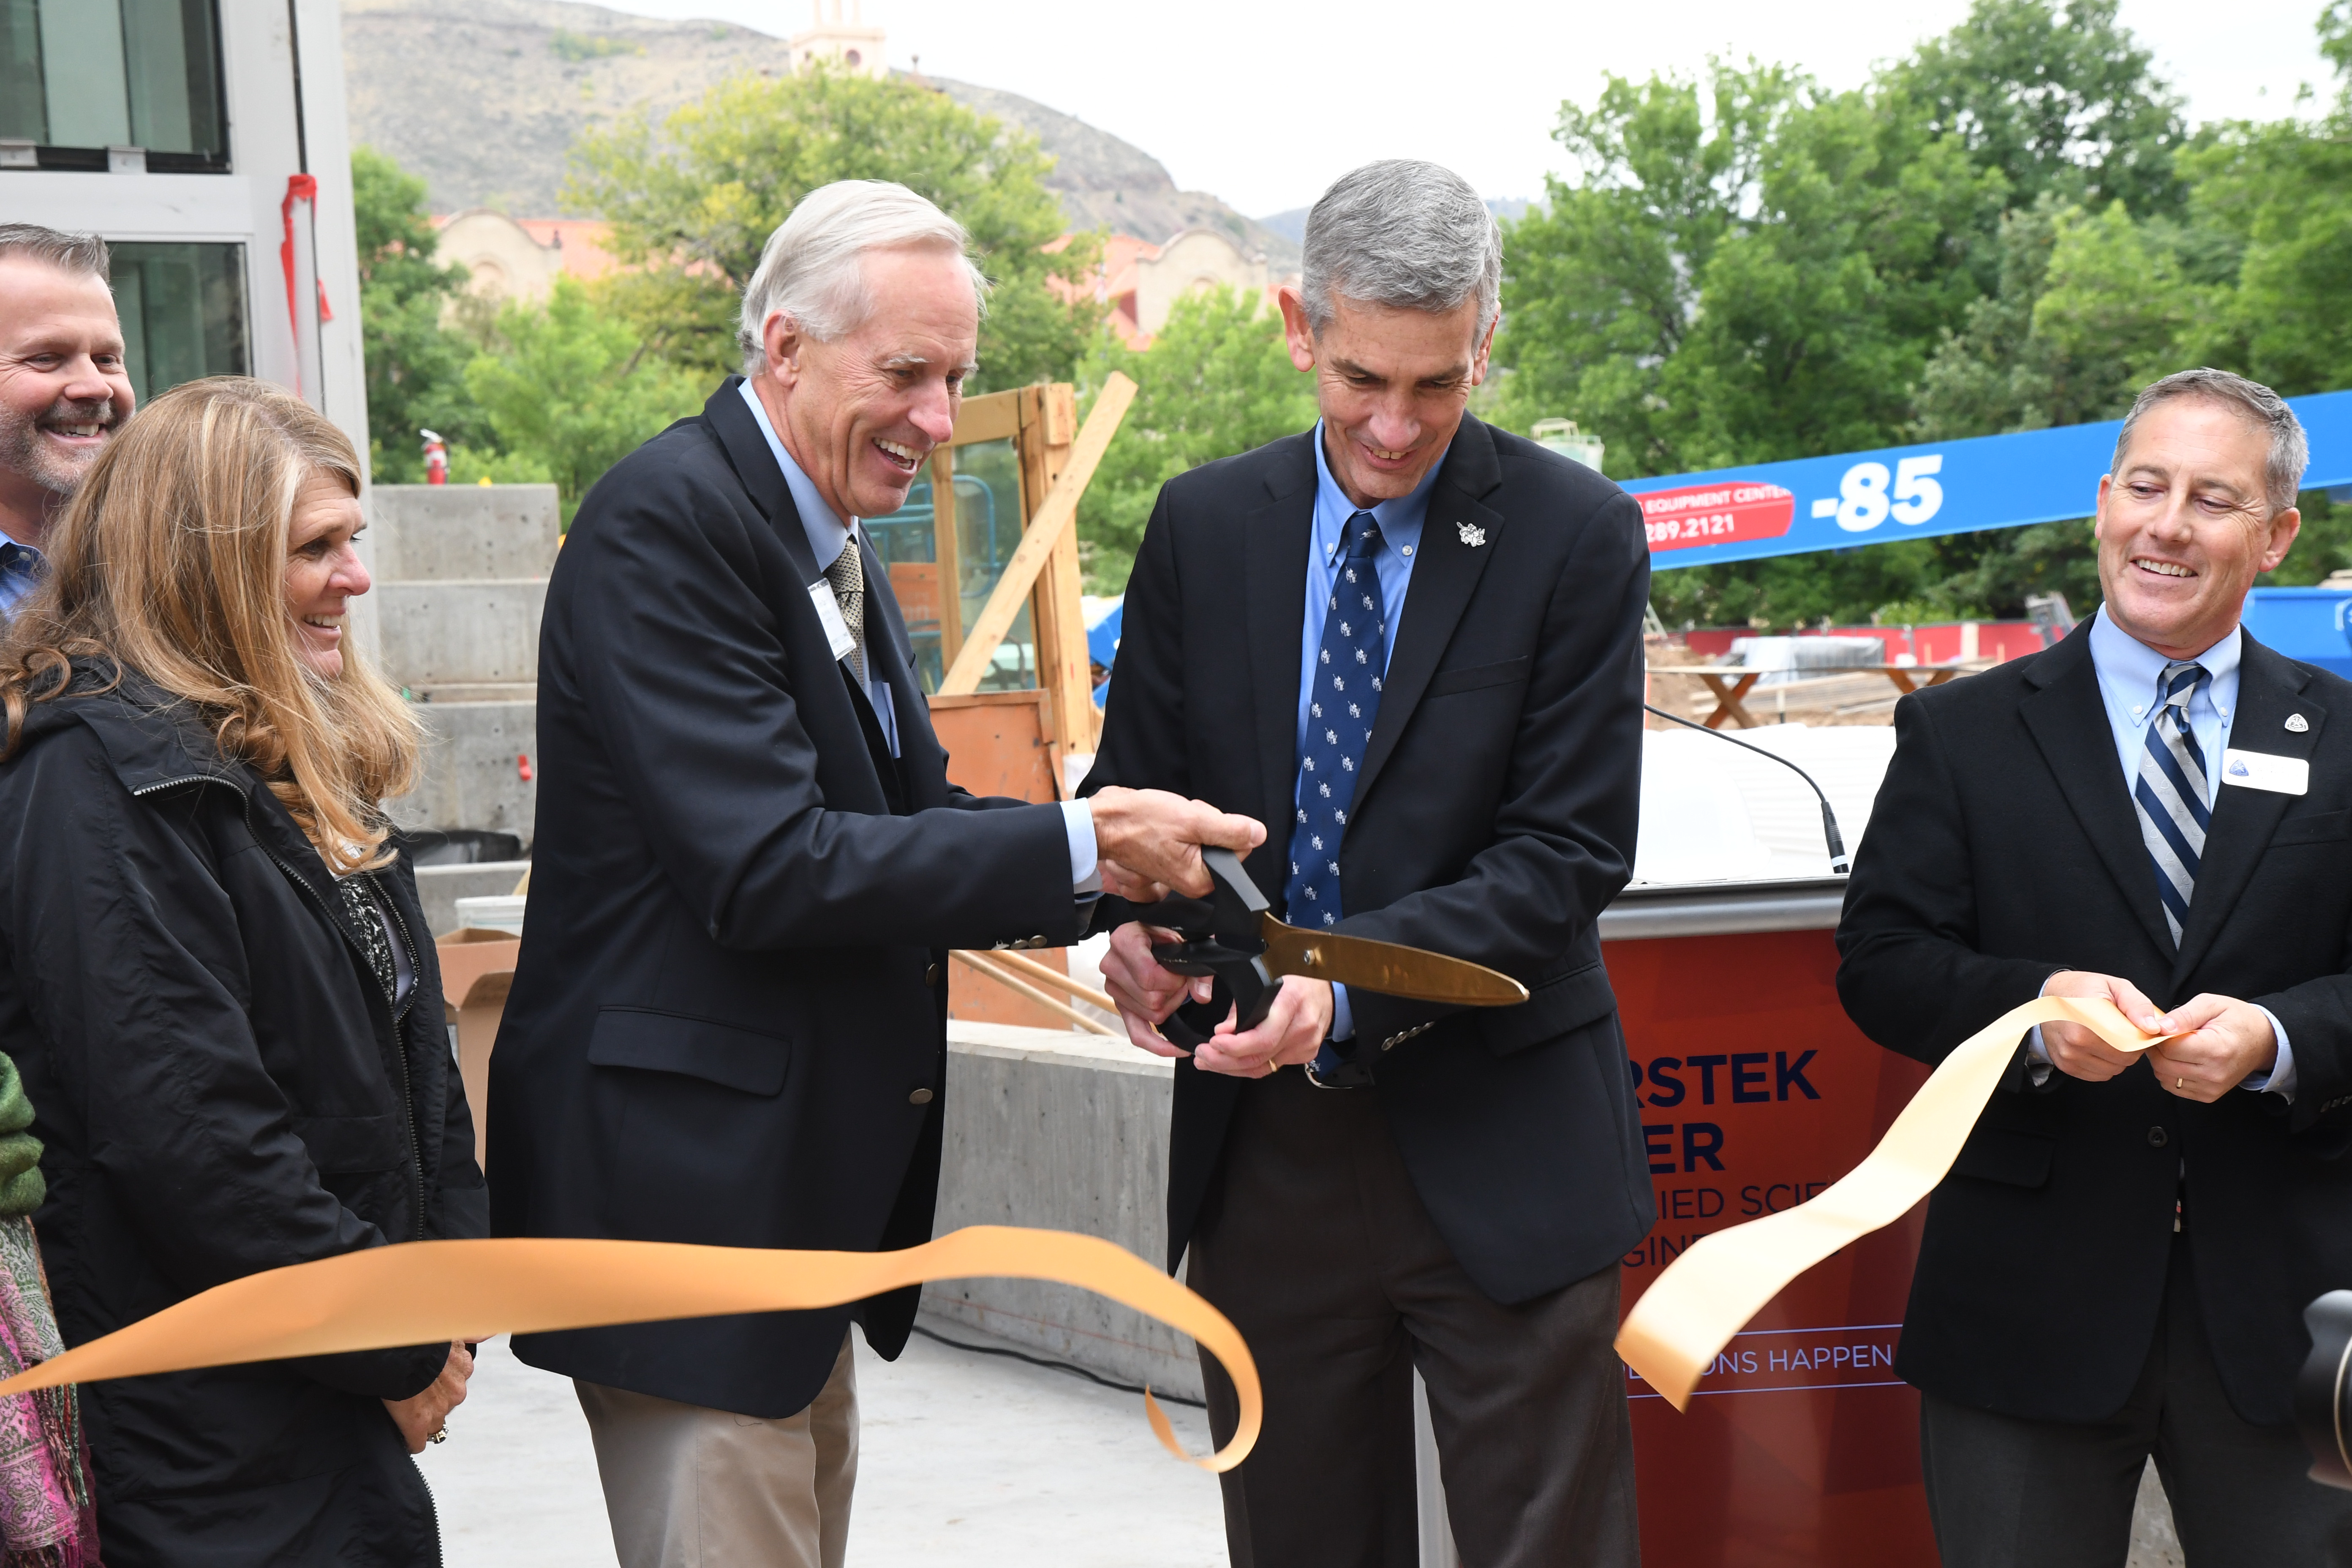 CoorsTek chairman John Coors and Mines president Paul Johnson cut the ribbon on the CoorsTek Center for Applied Science and Engineering